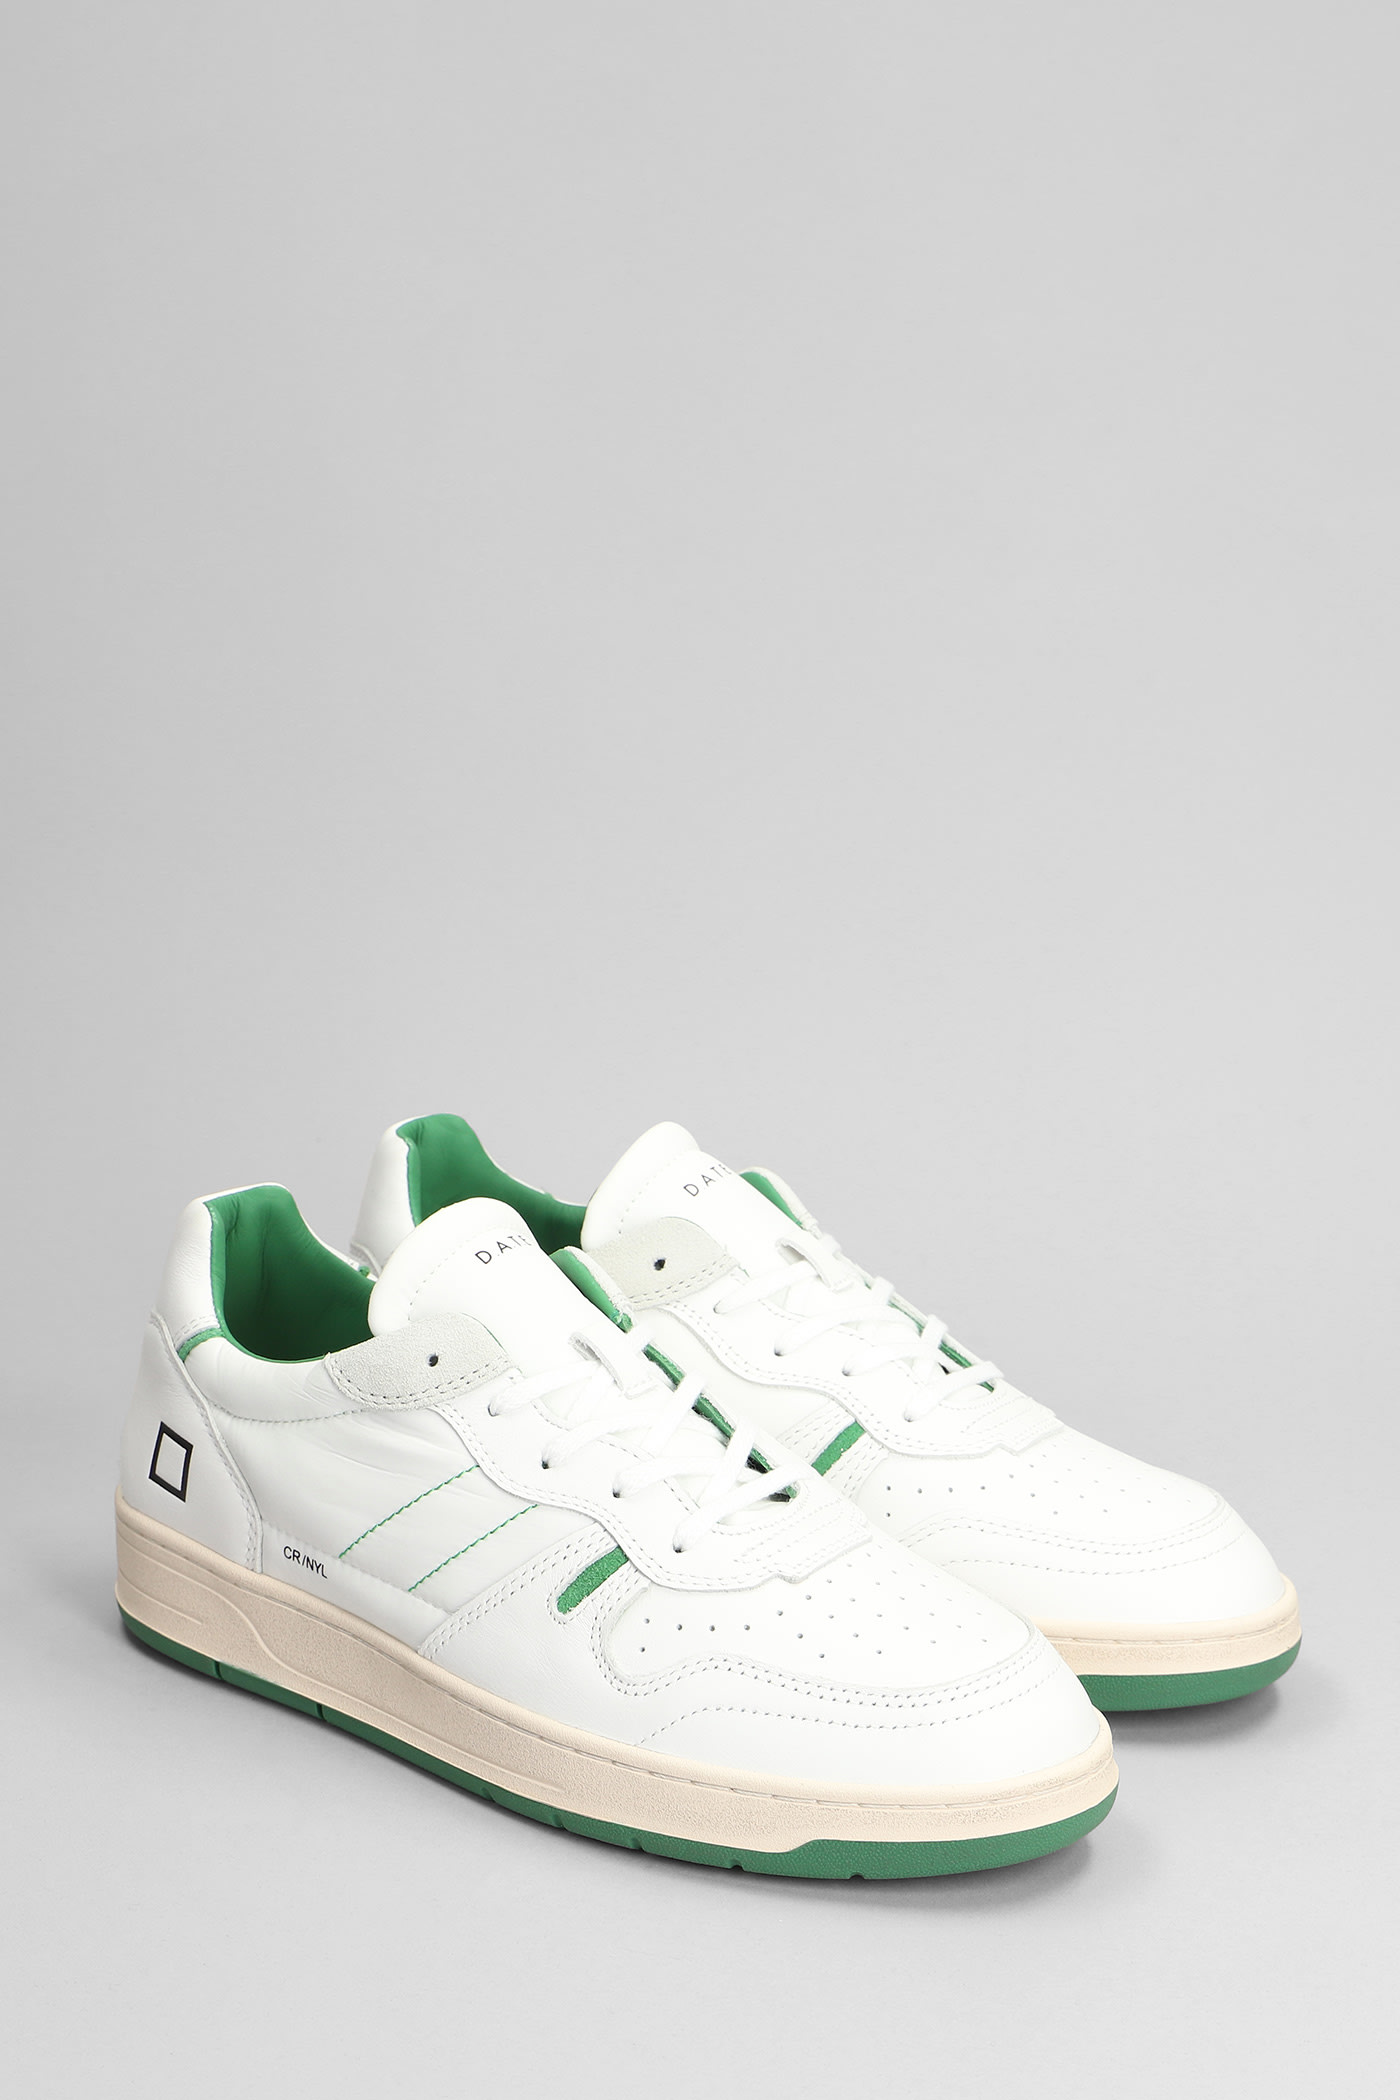 Shop Date Court 2.0 Sneakers In White Leather And Fabric